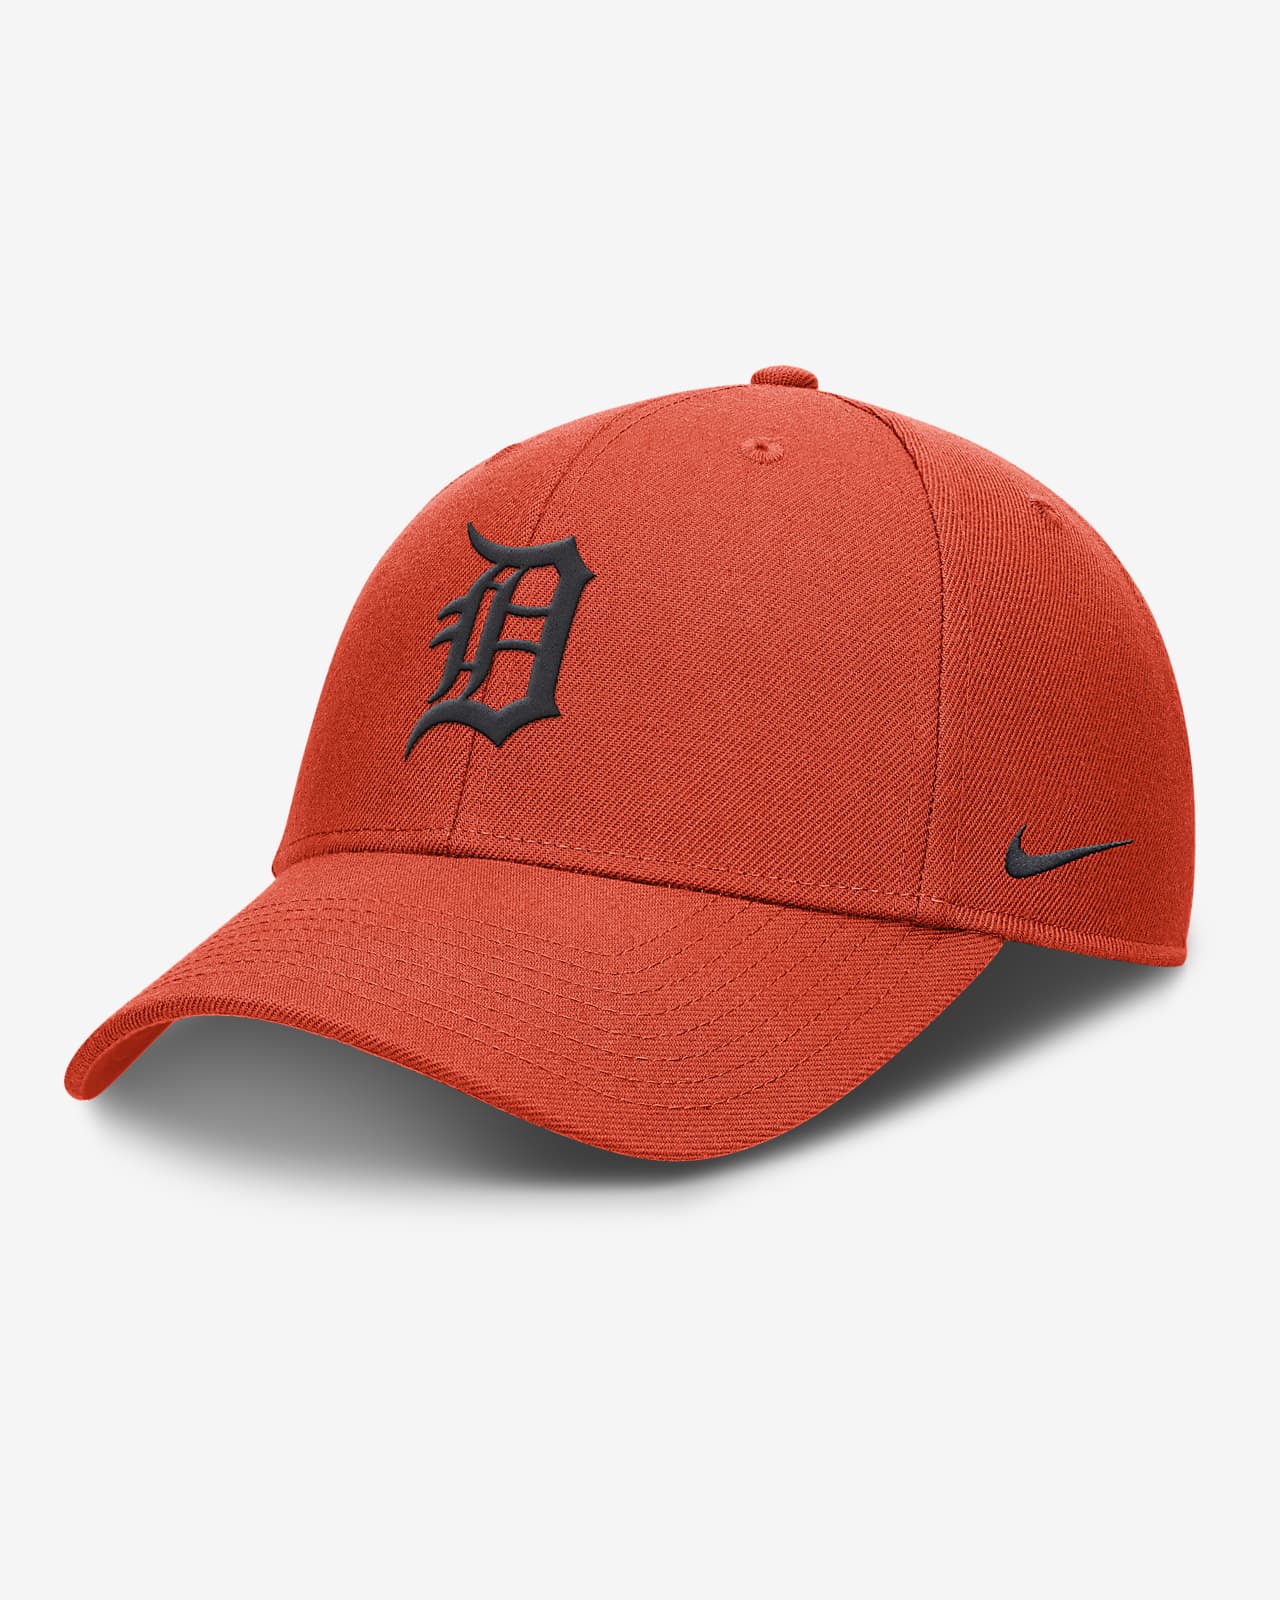 Men's Nike Red Canada Basketball Campus Adjustable Hat